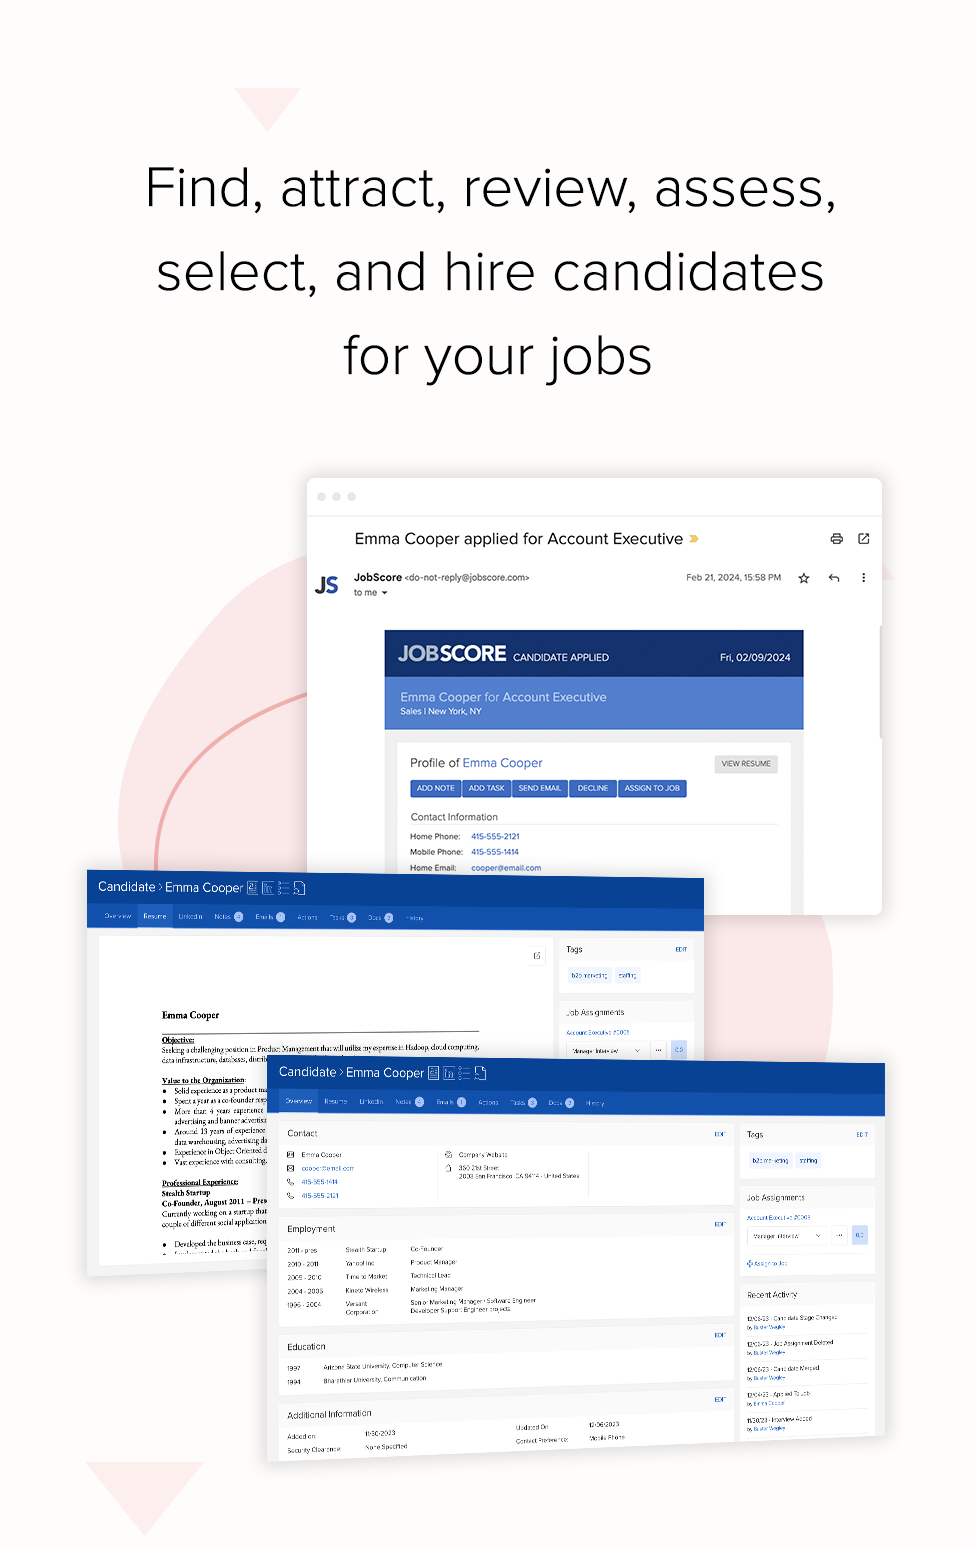 Find, attract, review, assets, select, and hire candidates for your jobs | mobile recruiting software candidates